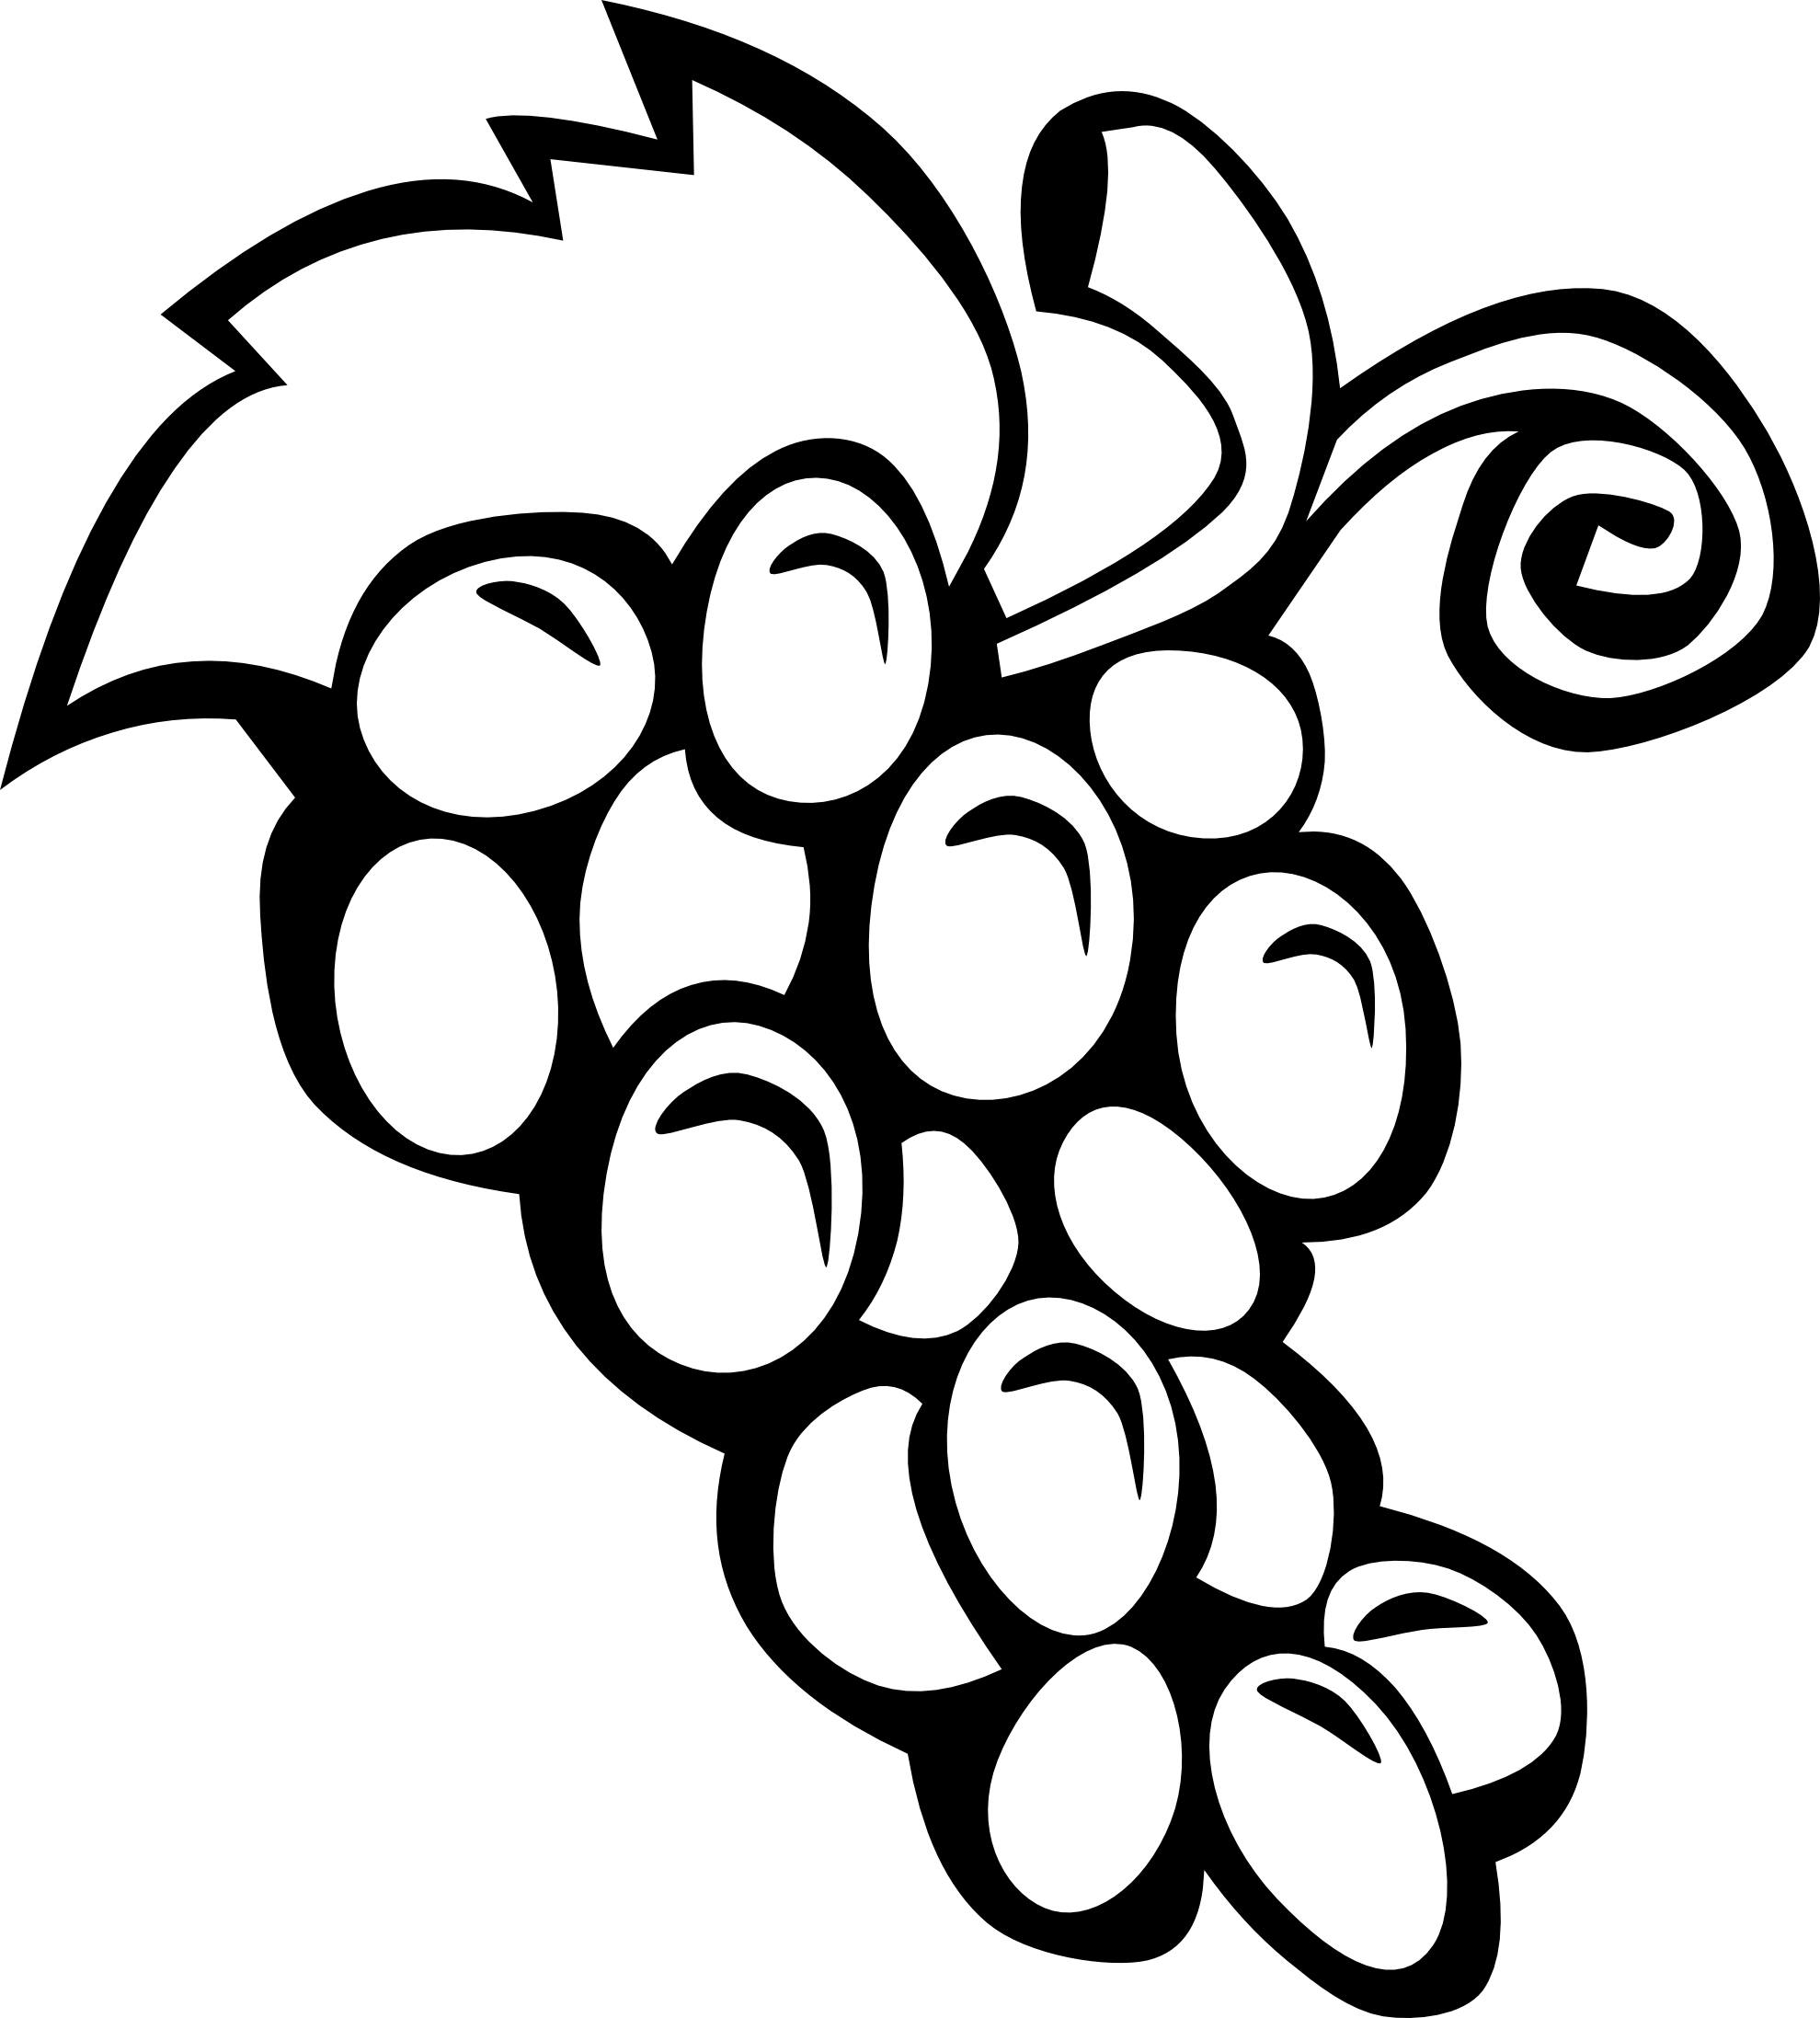 Black And White Fruit Clipart | Clipart Panda - Free Clipart Images